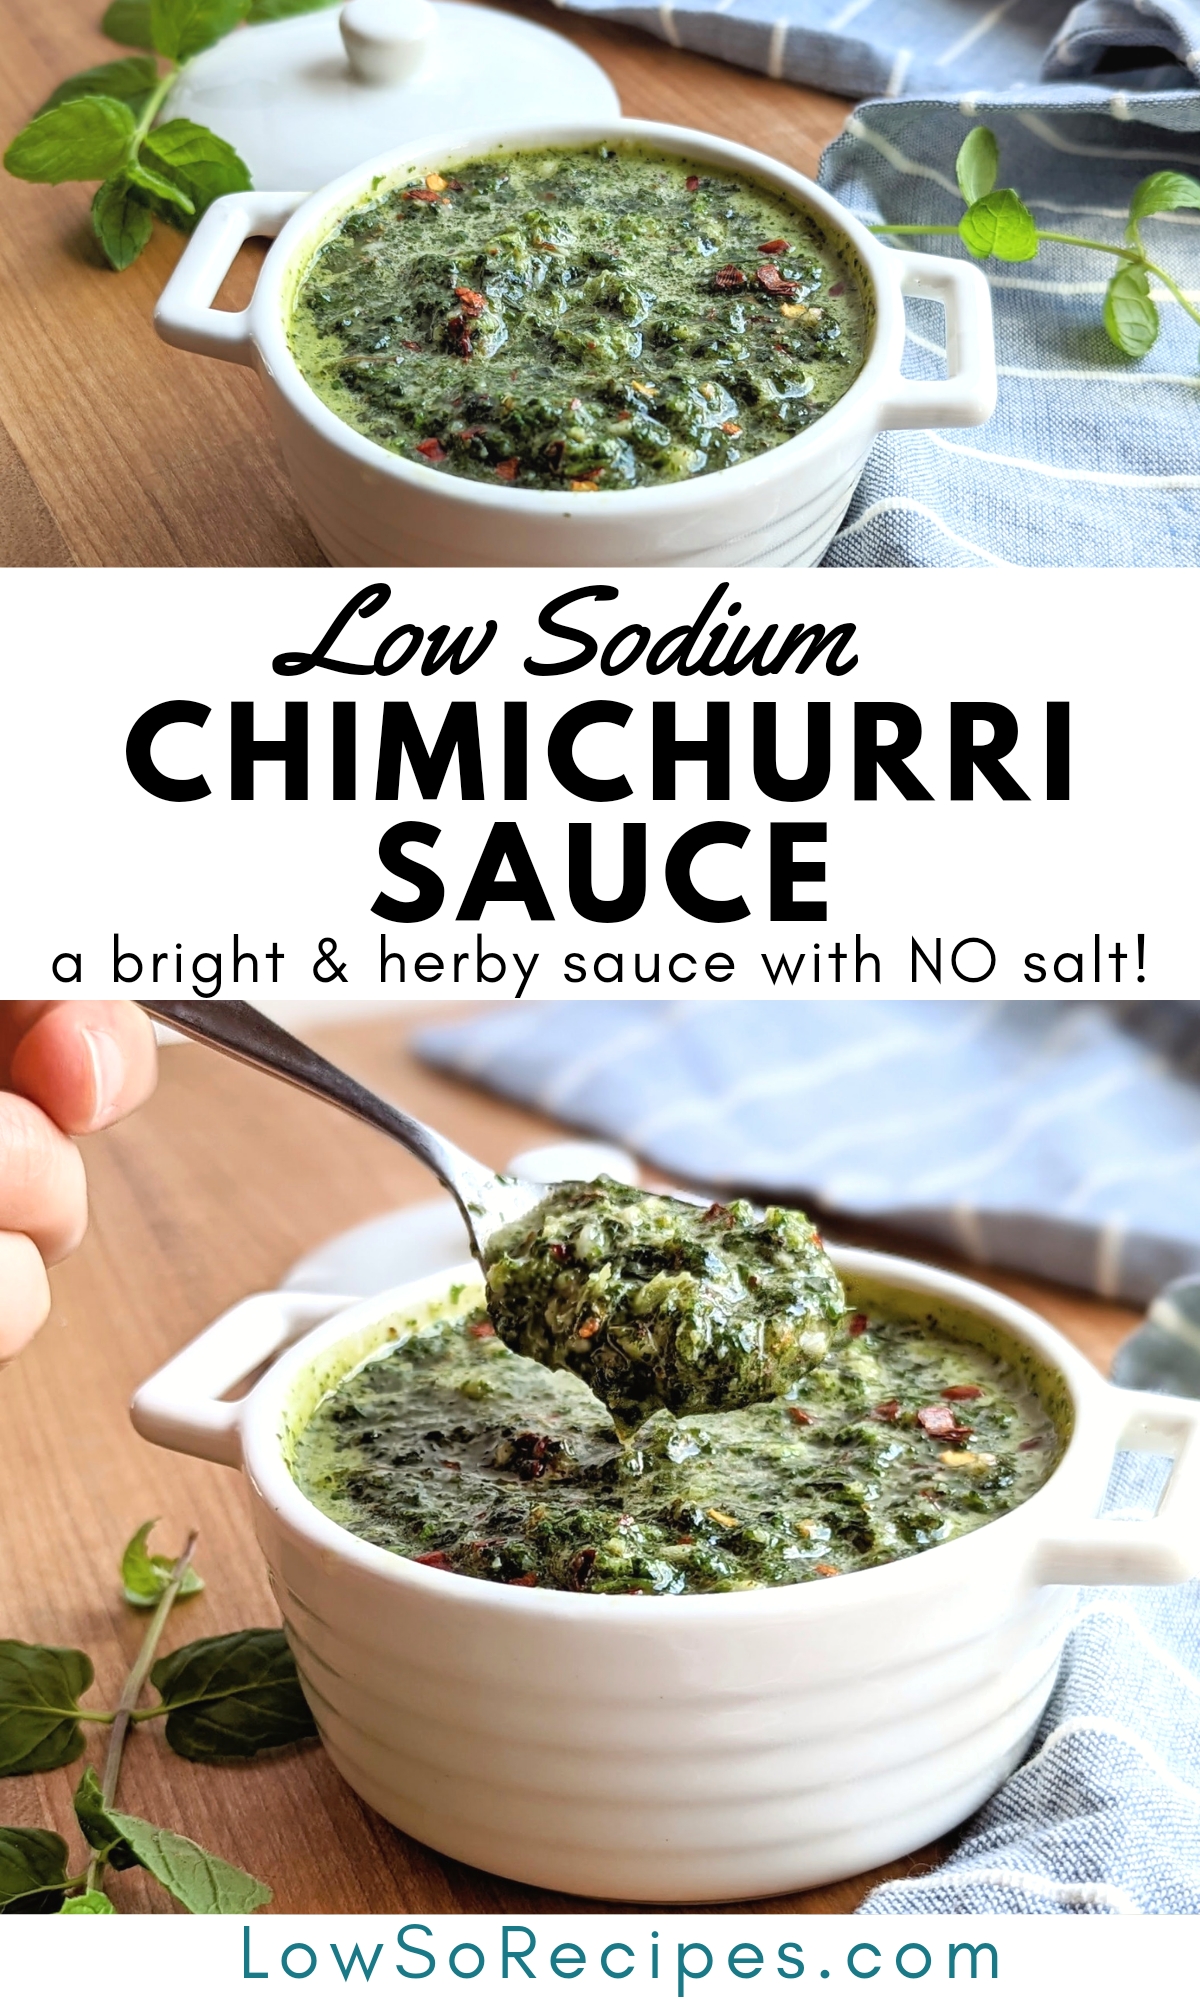 low sodium chimichurri sauce recipe no salt added healthy sauces with parsley and cilantro